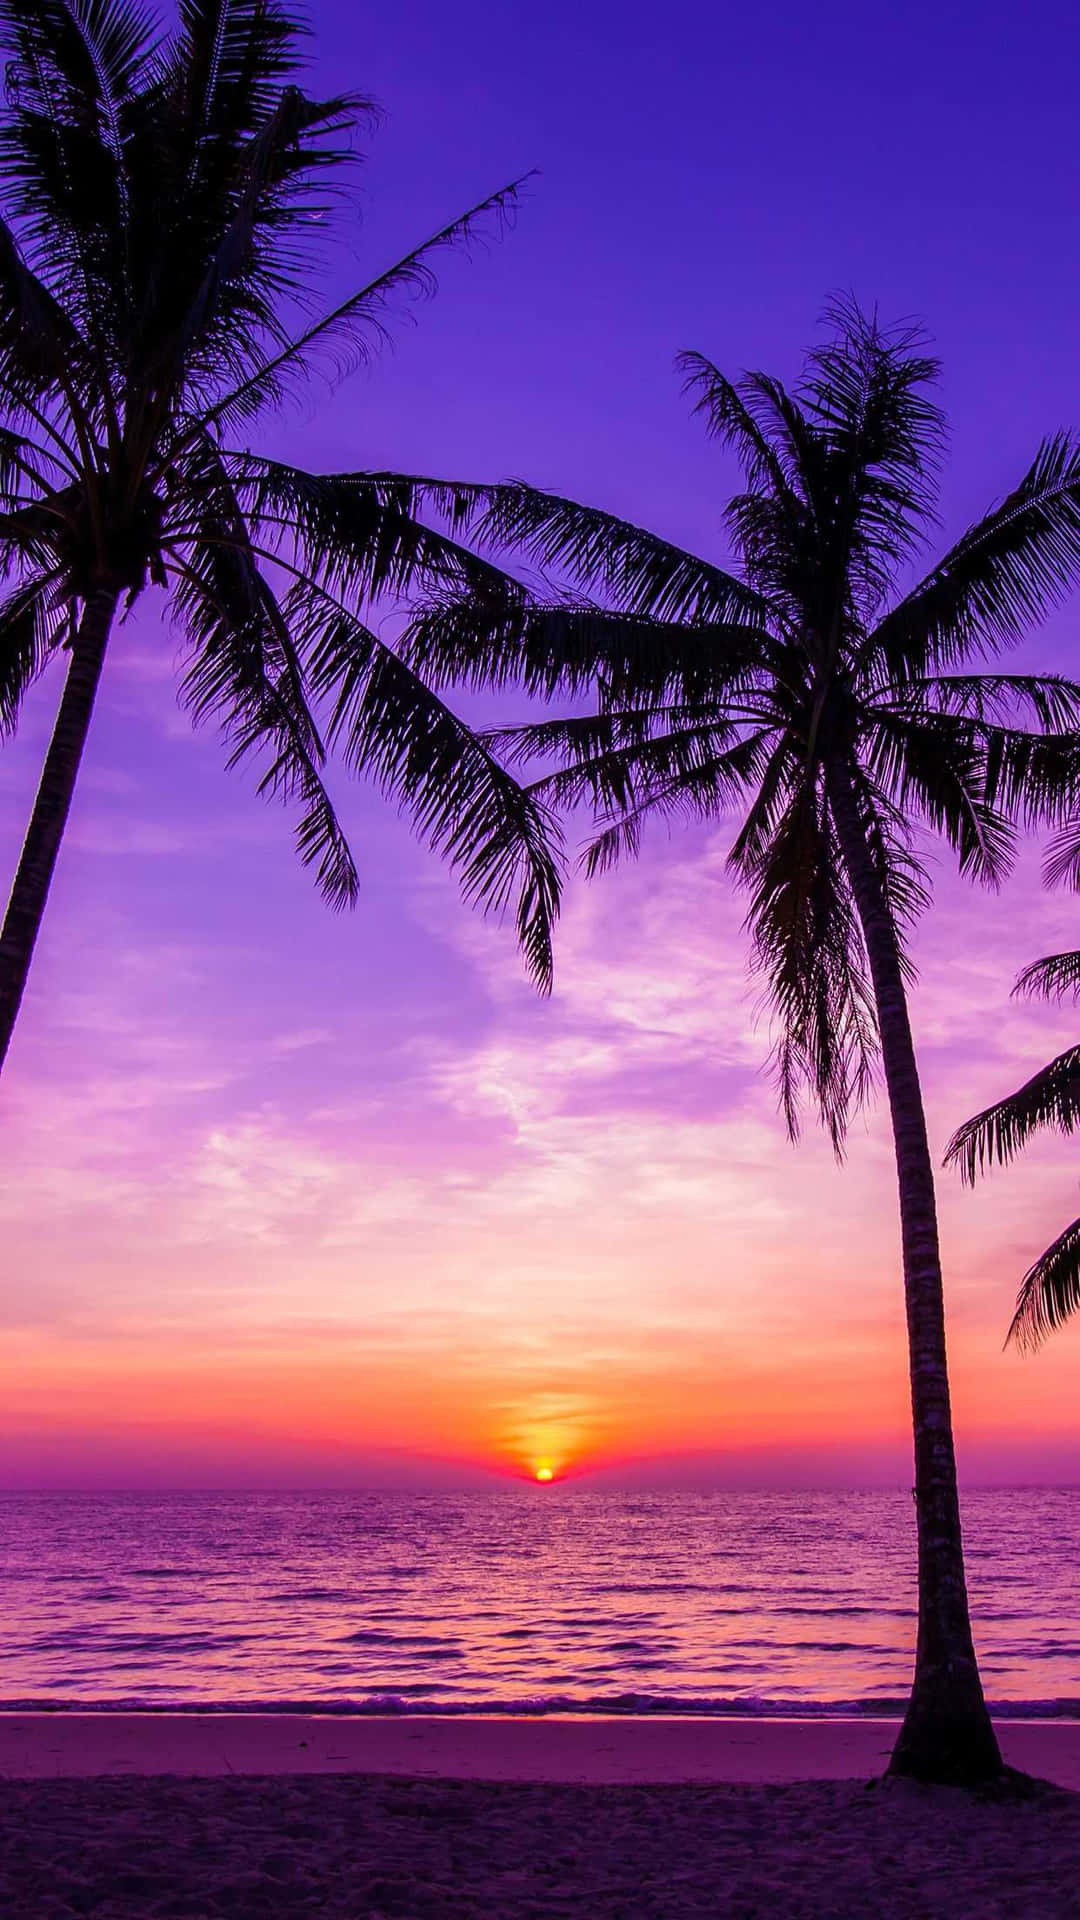 A Sunset With Palm Trees On A Beach